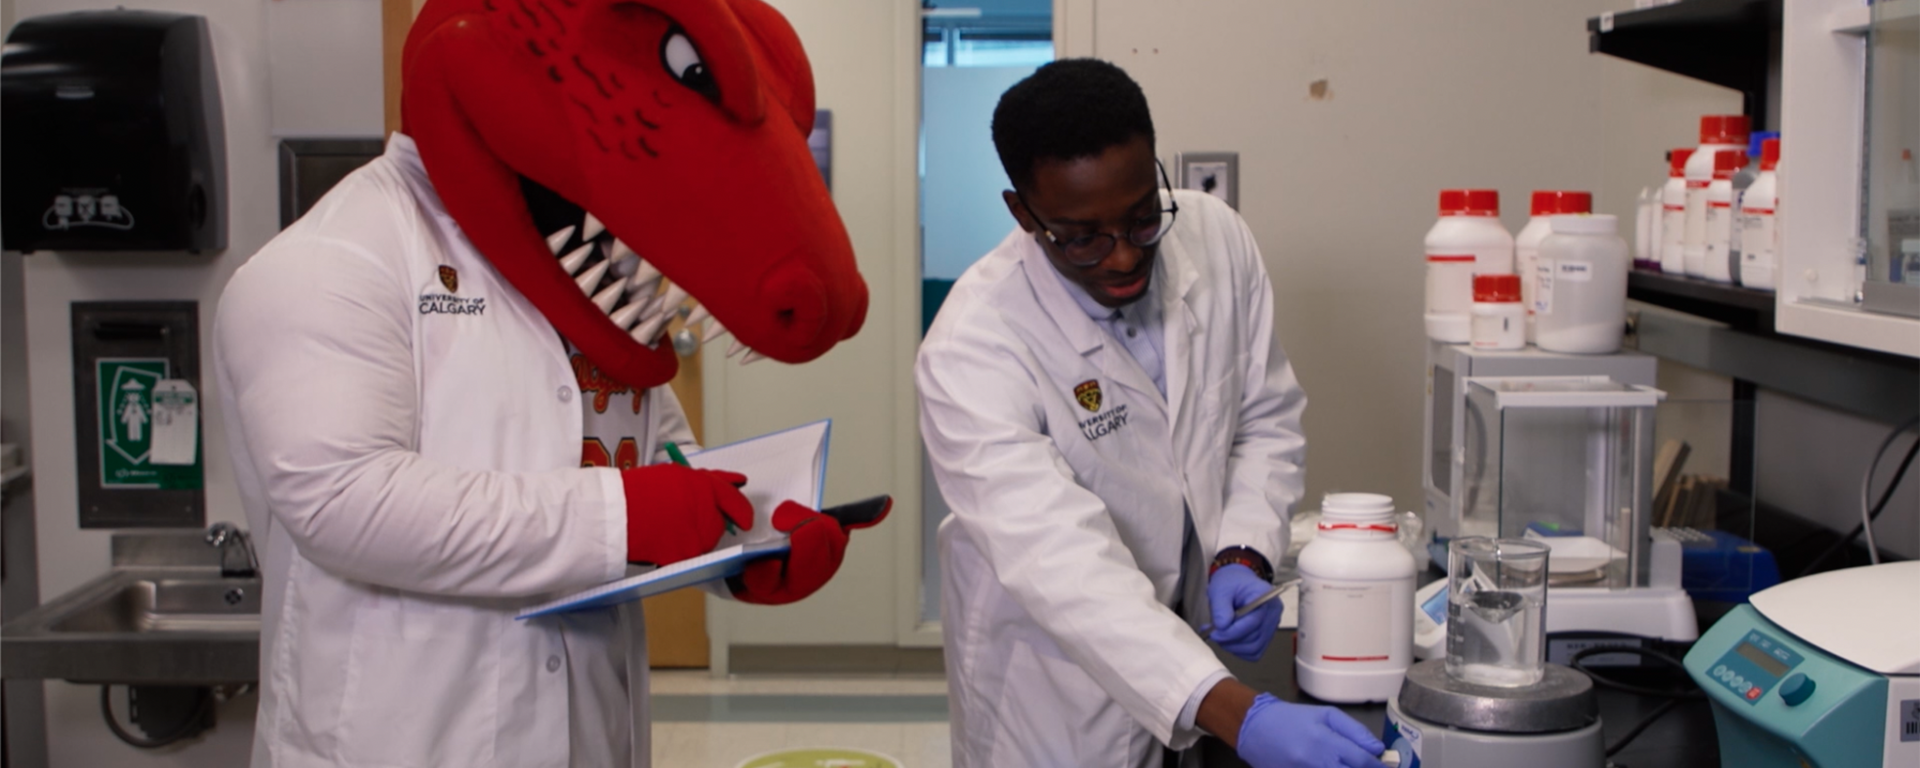 UCalgary's Rex tours research labs